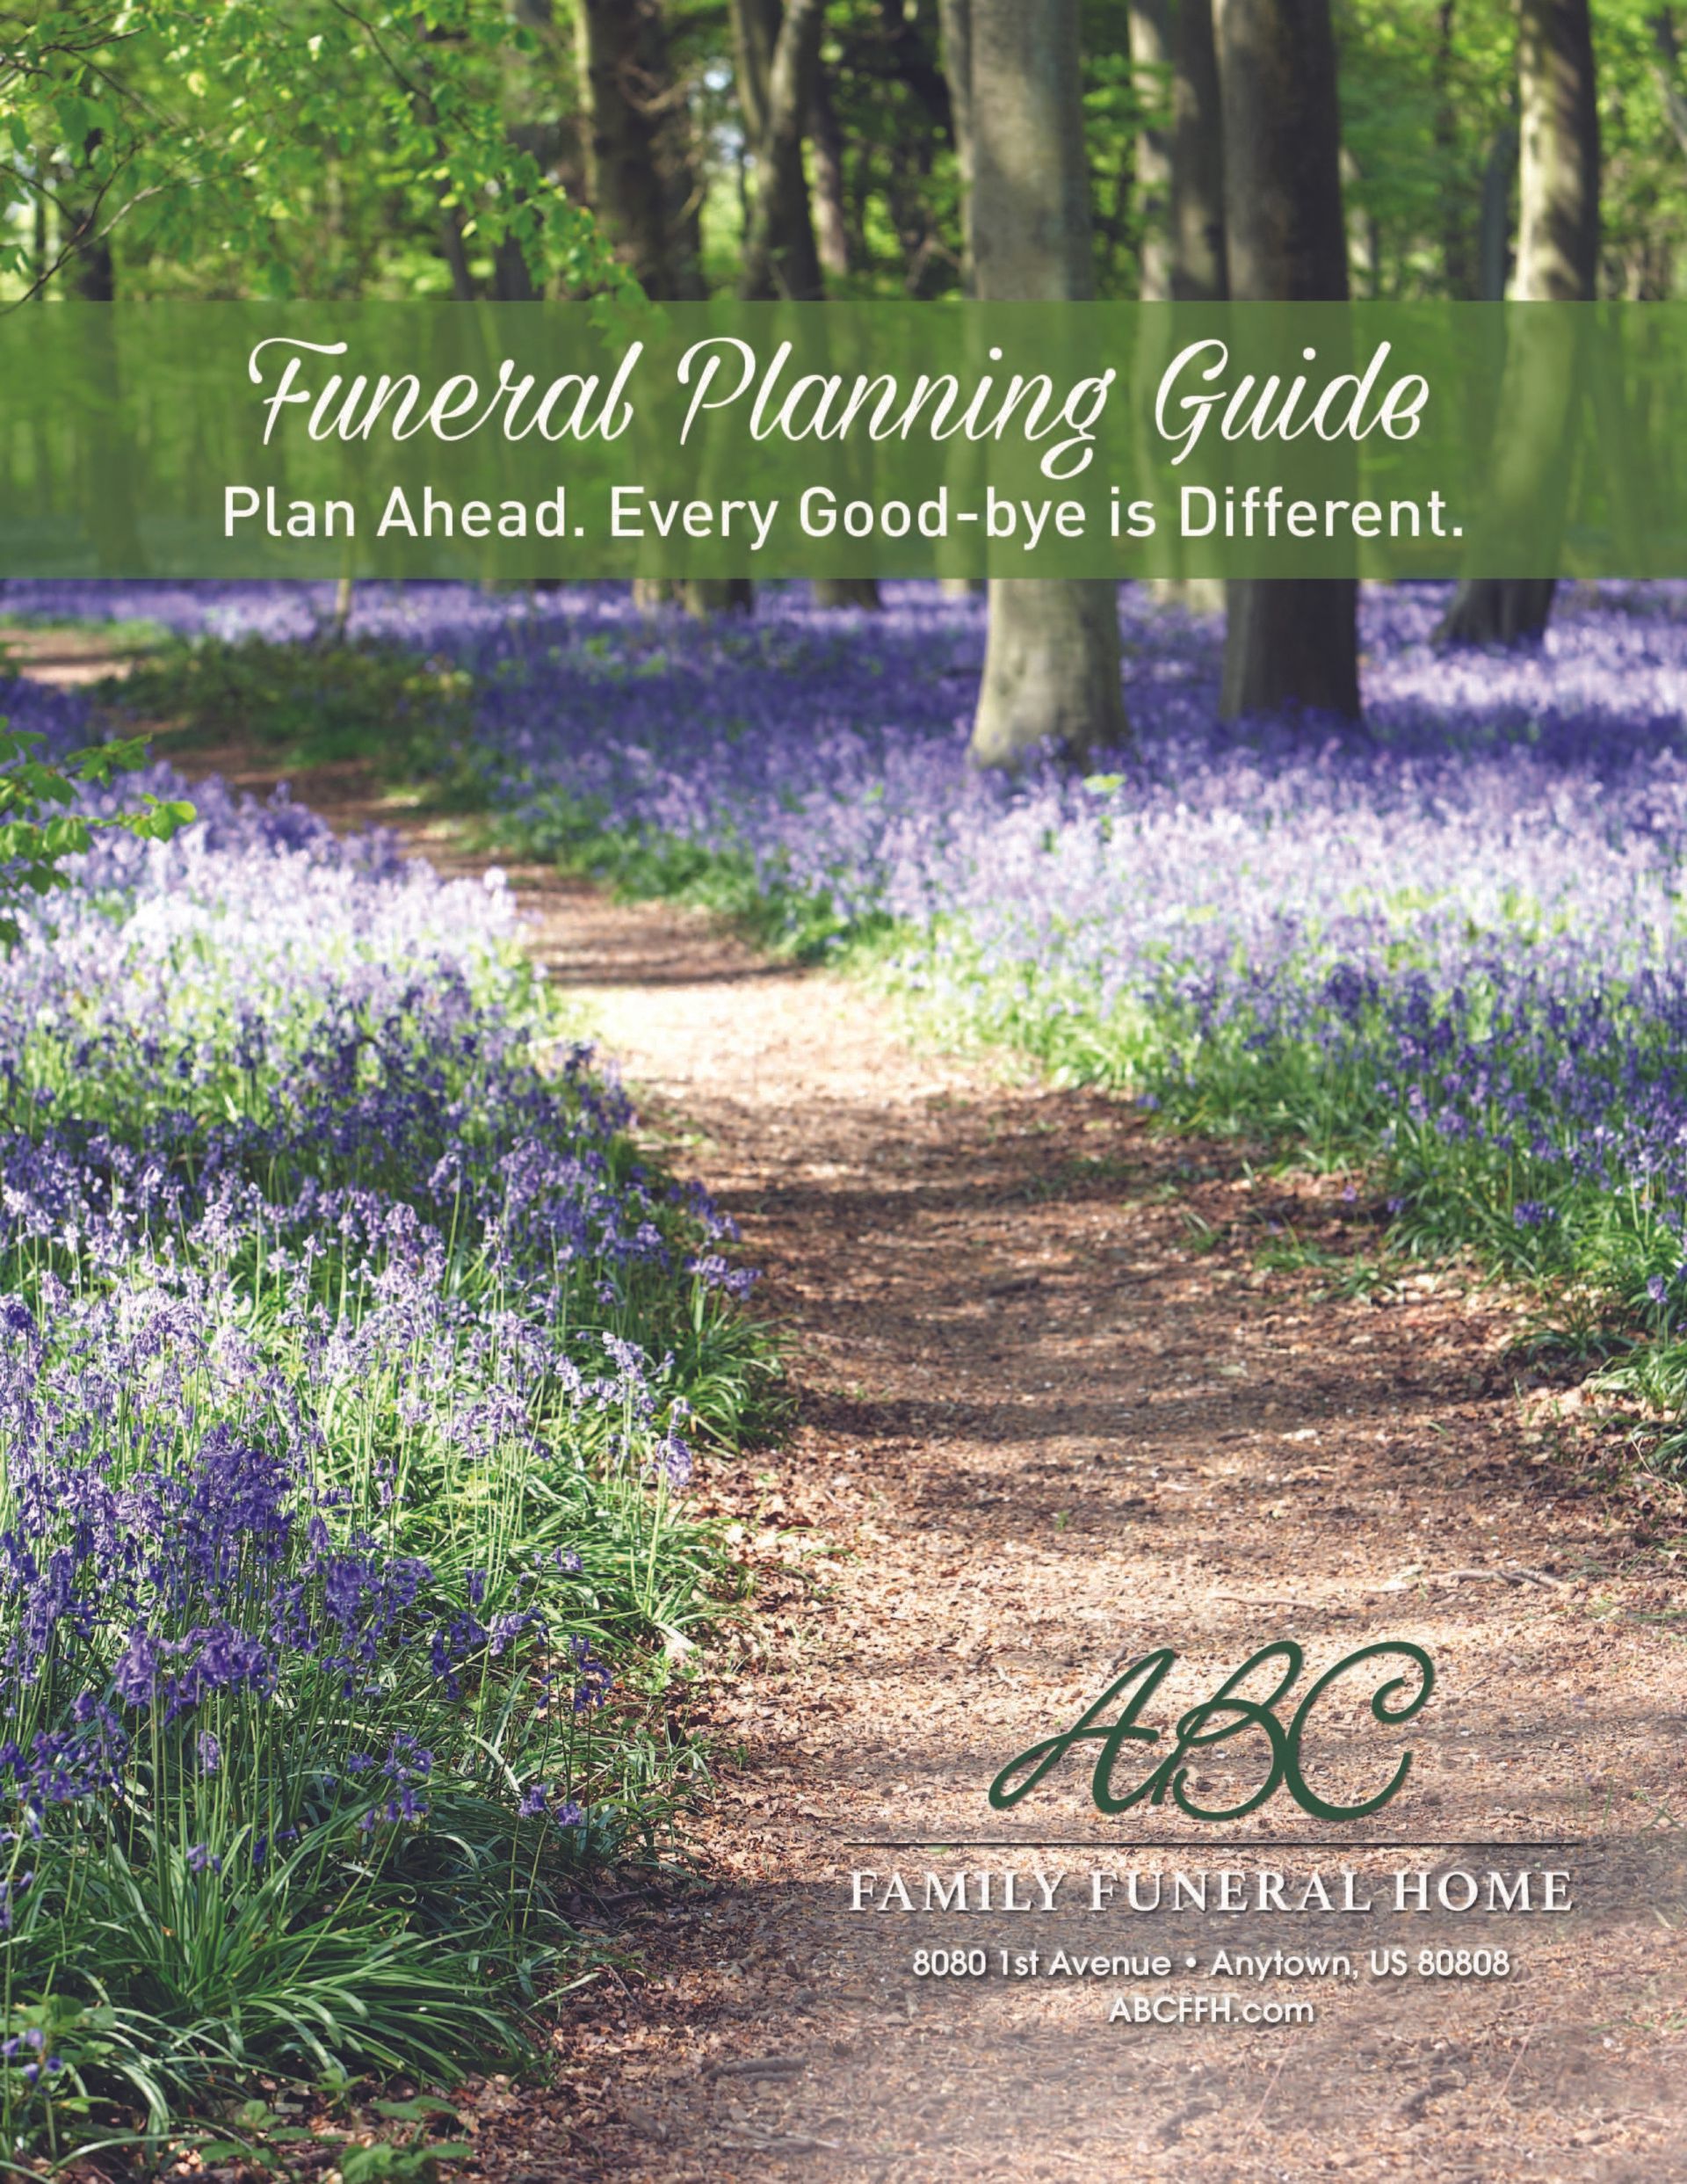 FAC Marketing Funeral Planning Guide